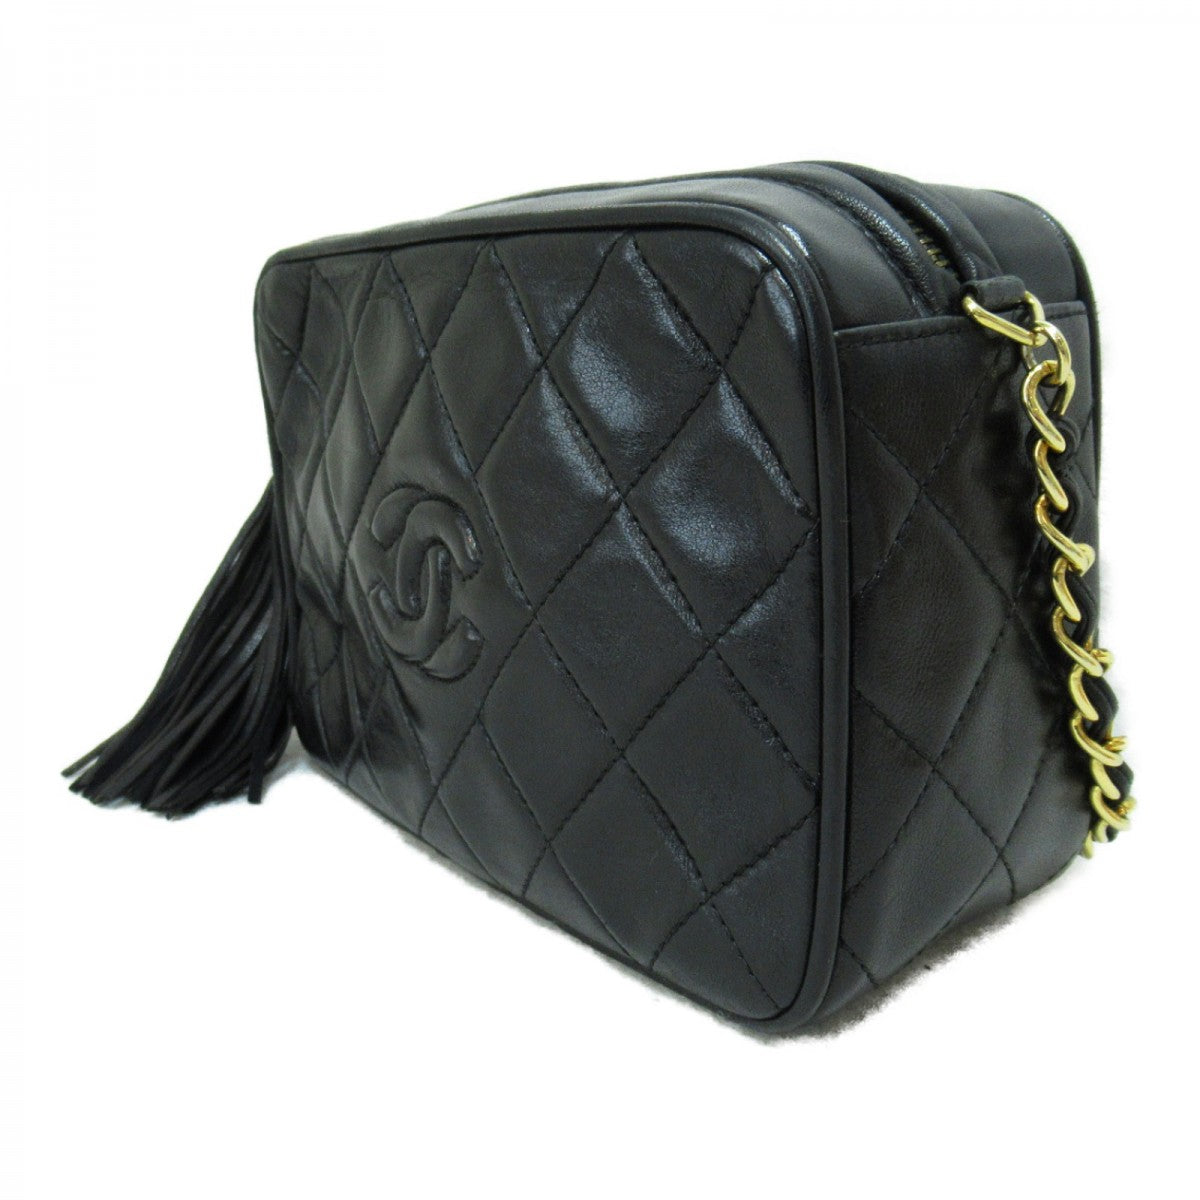 CC Quilted Leather Camera Bag